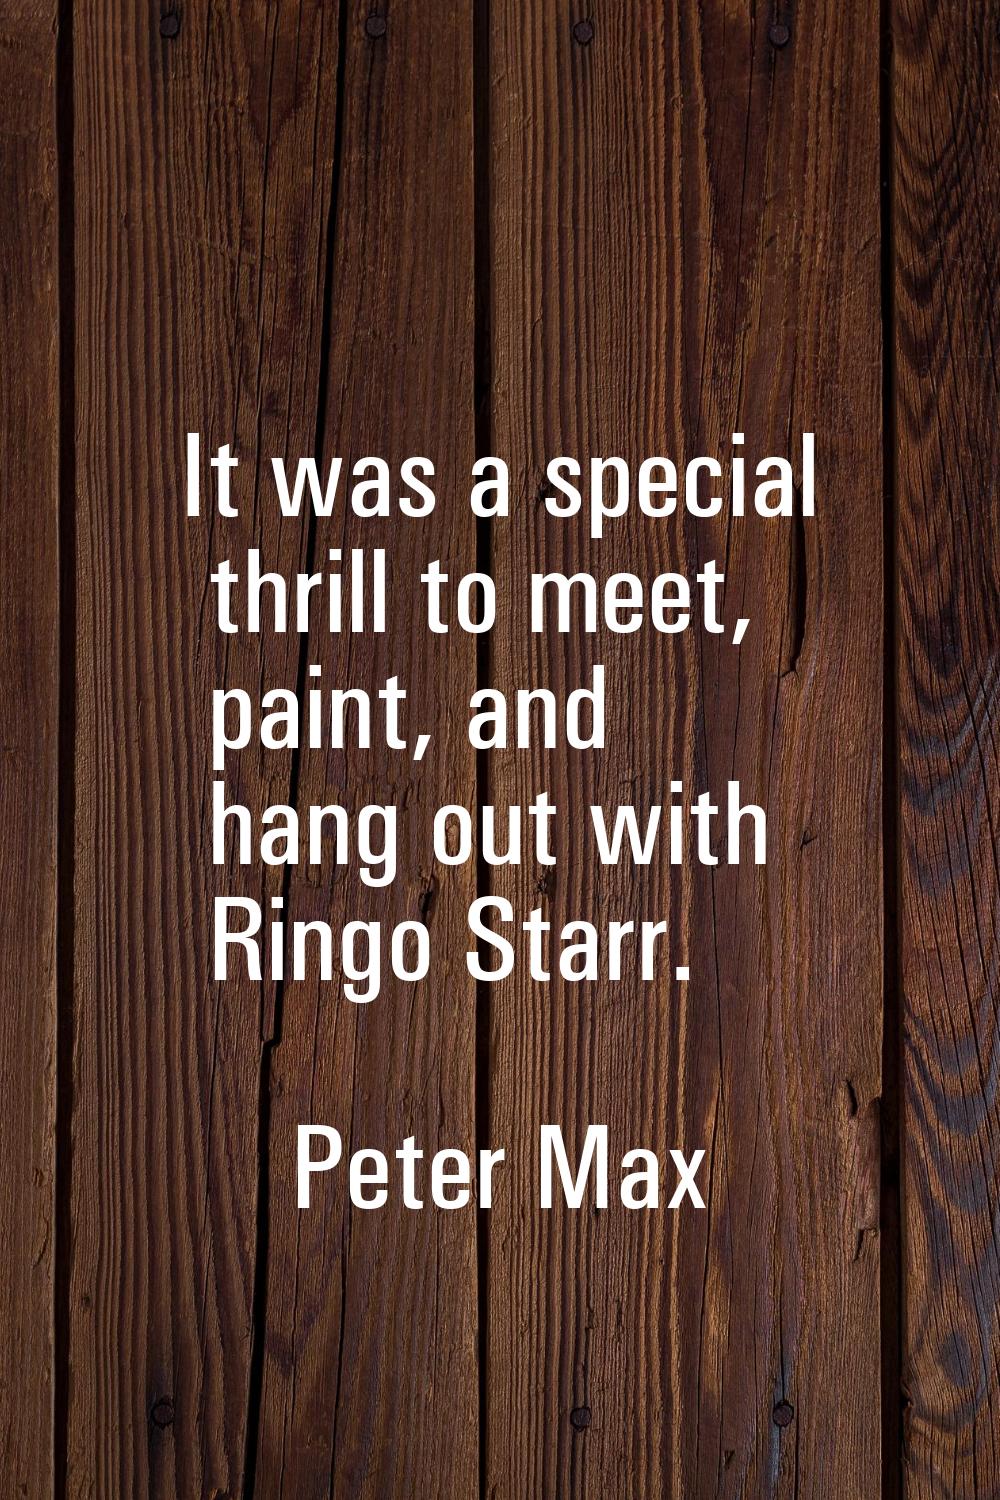 It was a special thrill to meet, paint, and hang out with Ringo Starr.